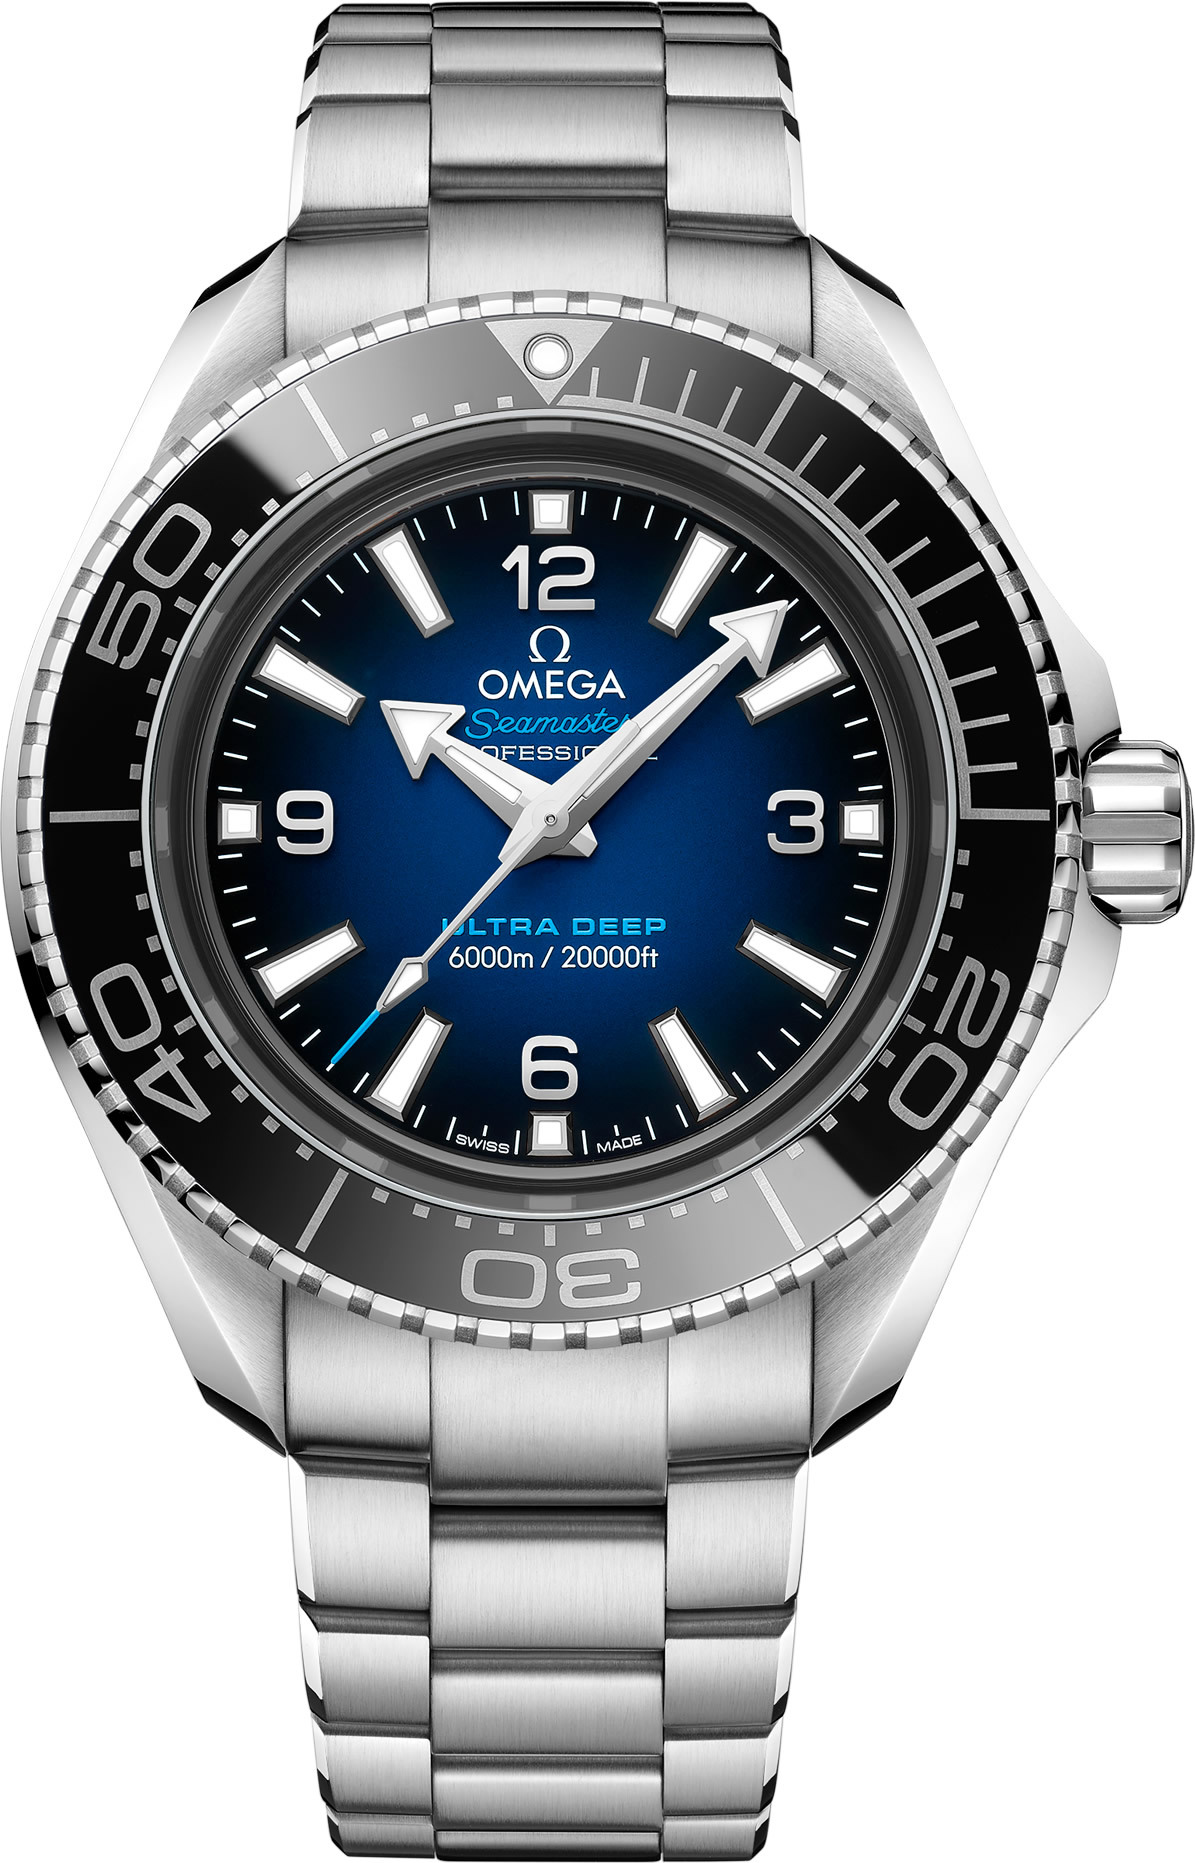 Omega Seamaster Planet Ocean 6000m Ultra Deep Blue Dial 45.5mm on Bracelet  - Exquisite Timepieces